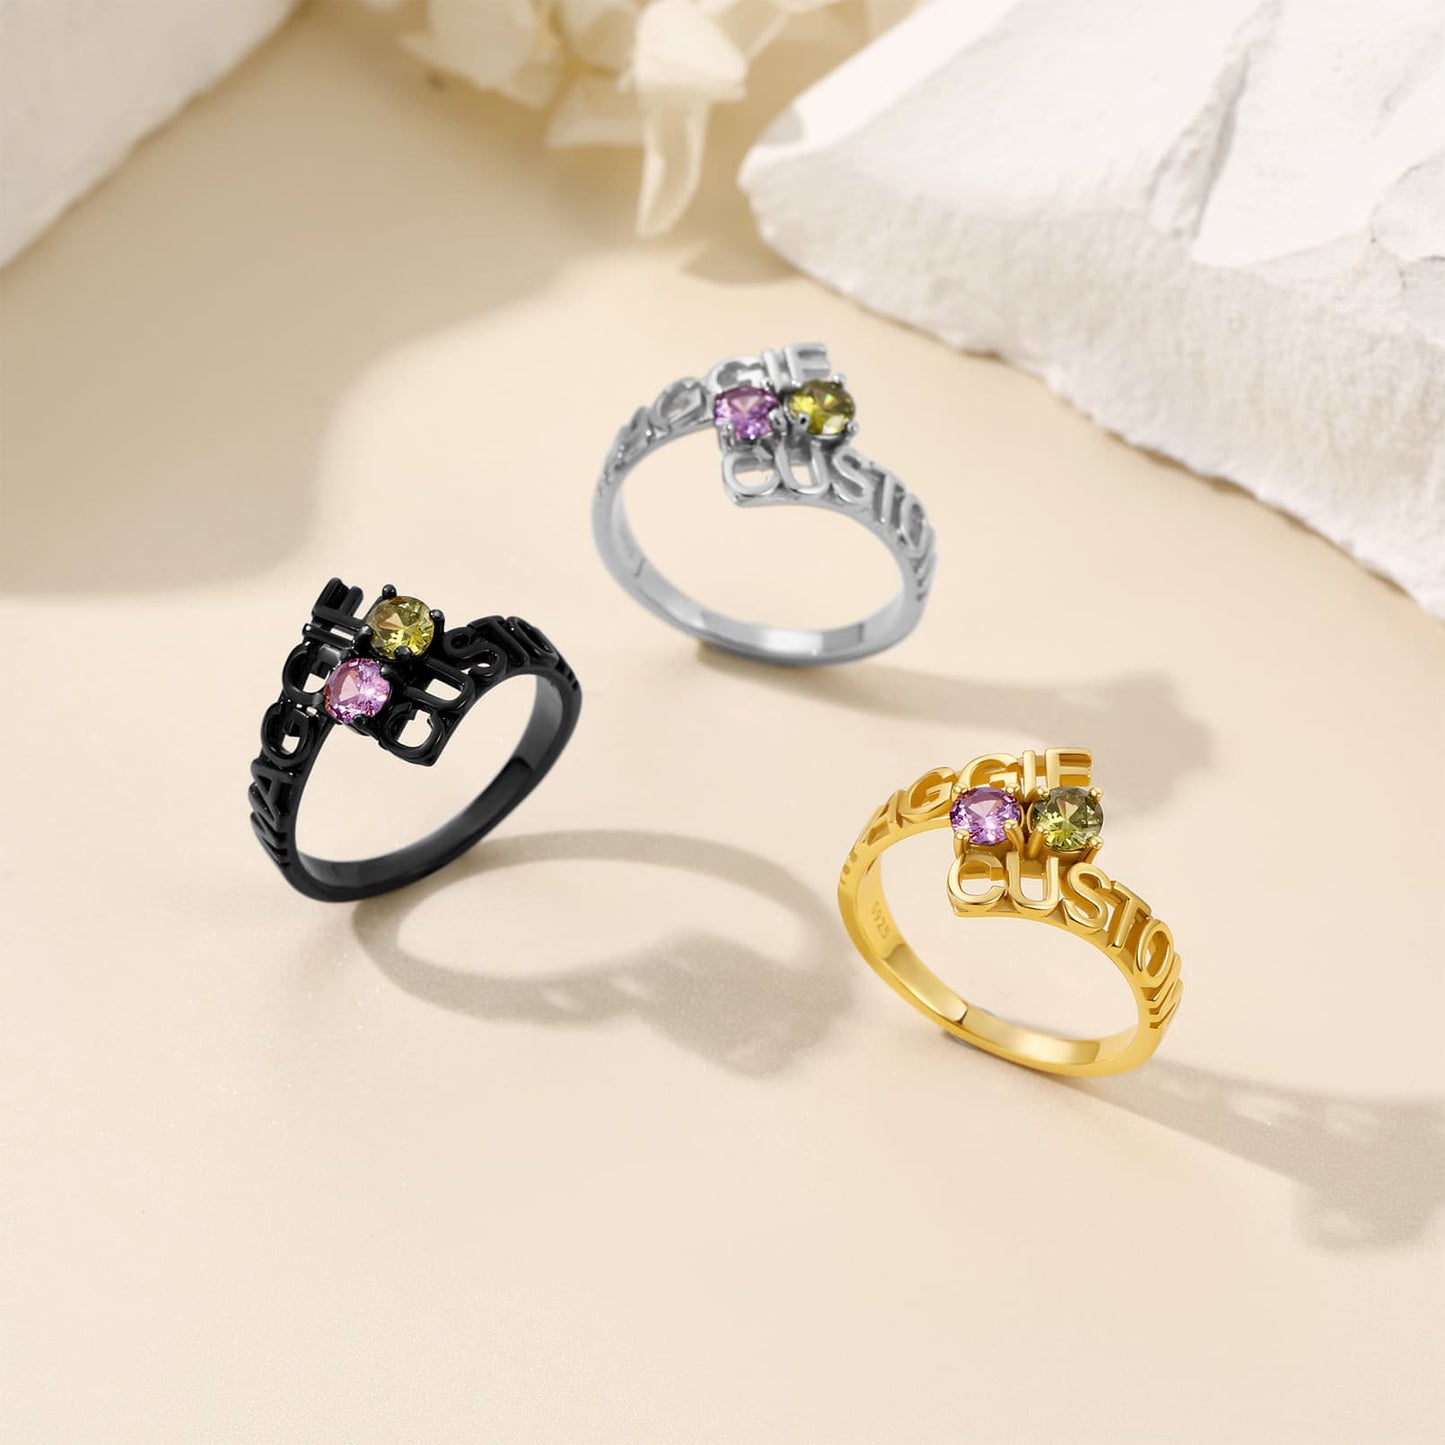 Name Ring With Birthstone